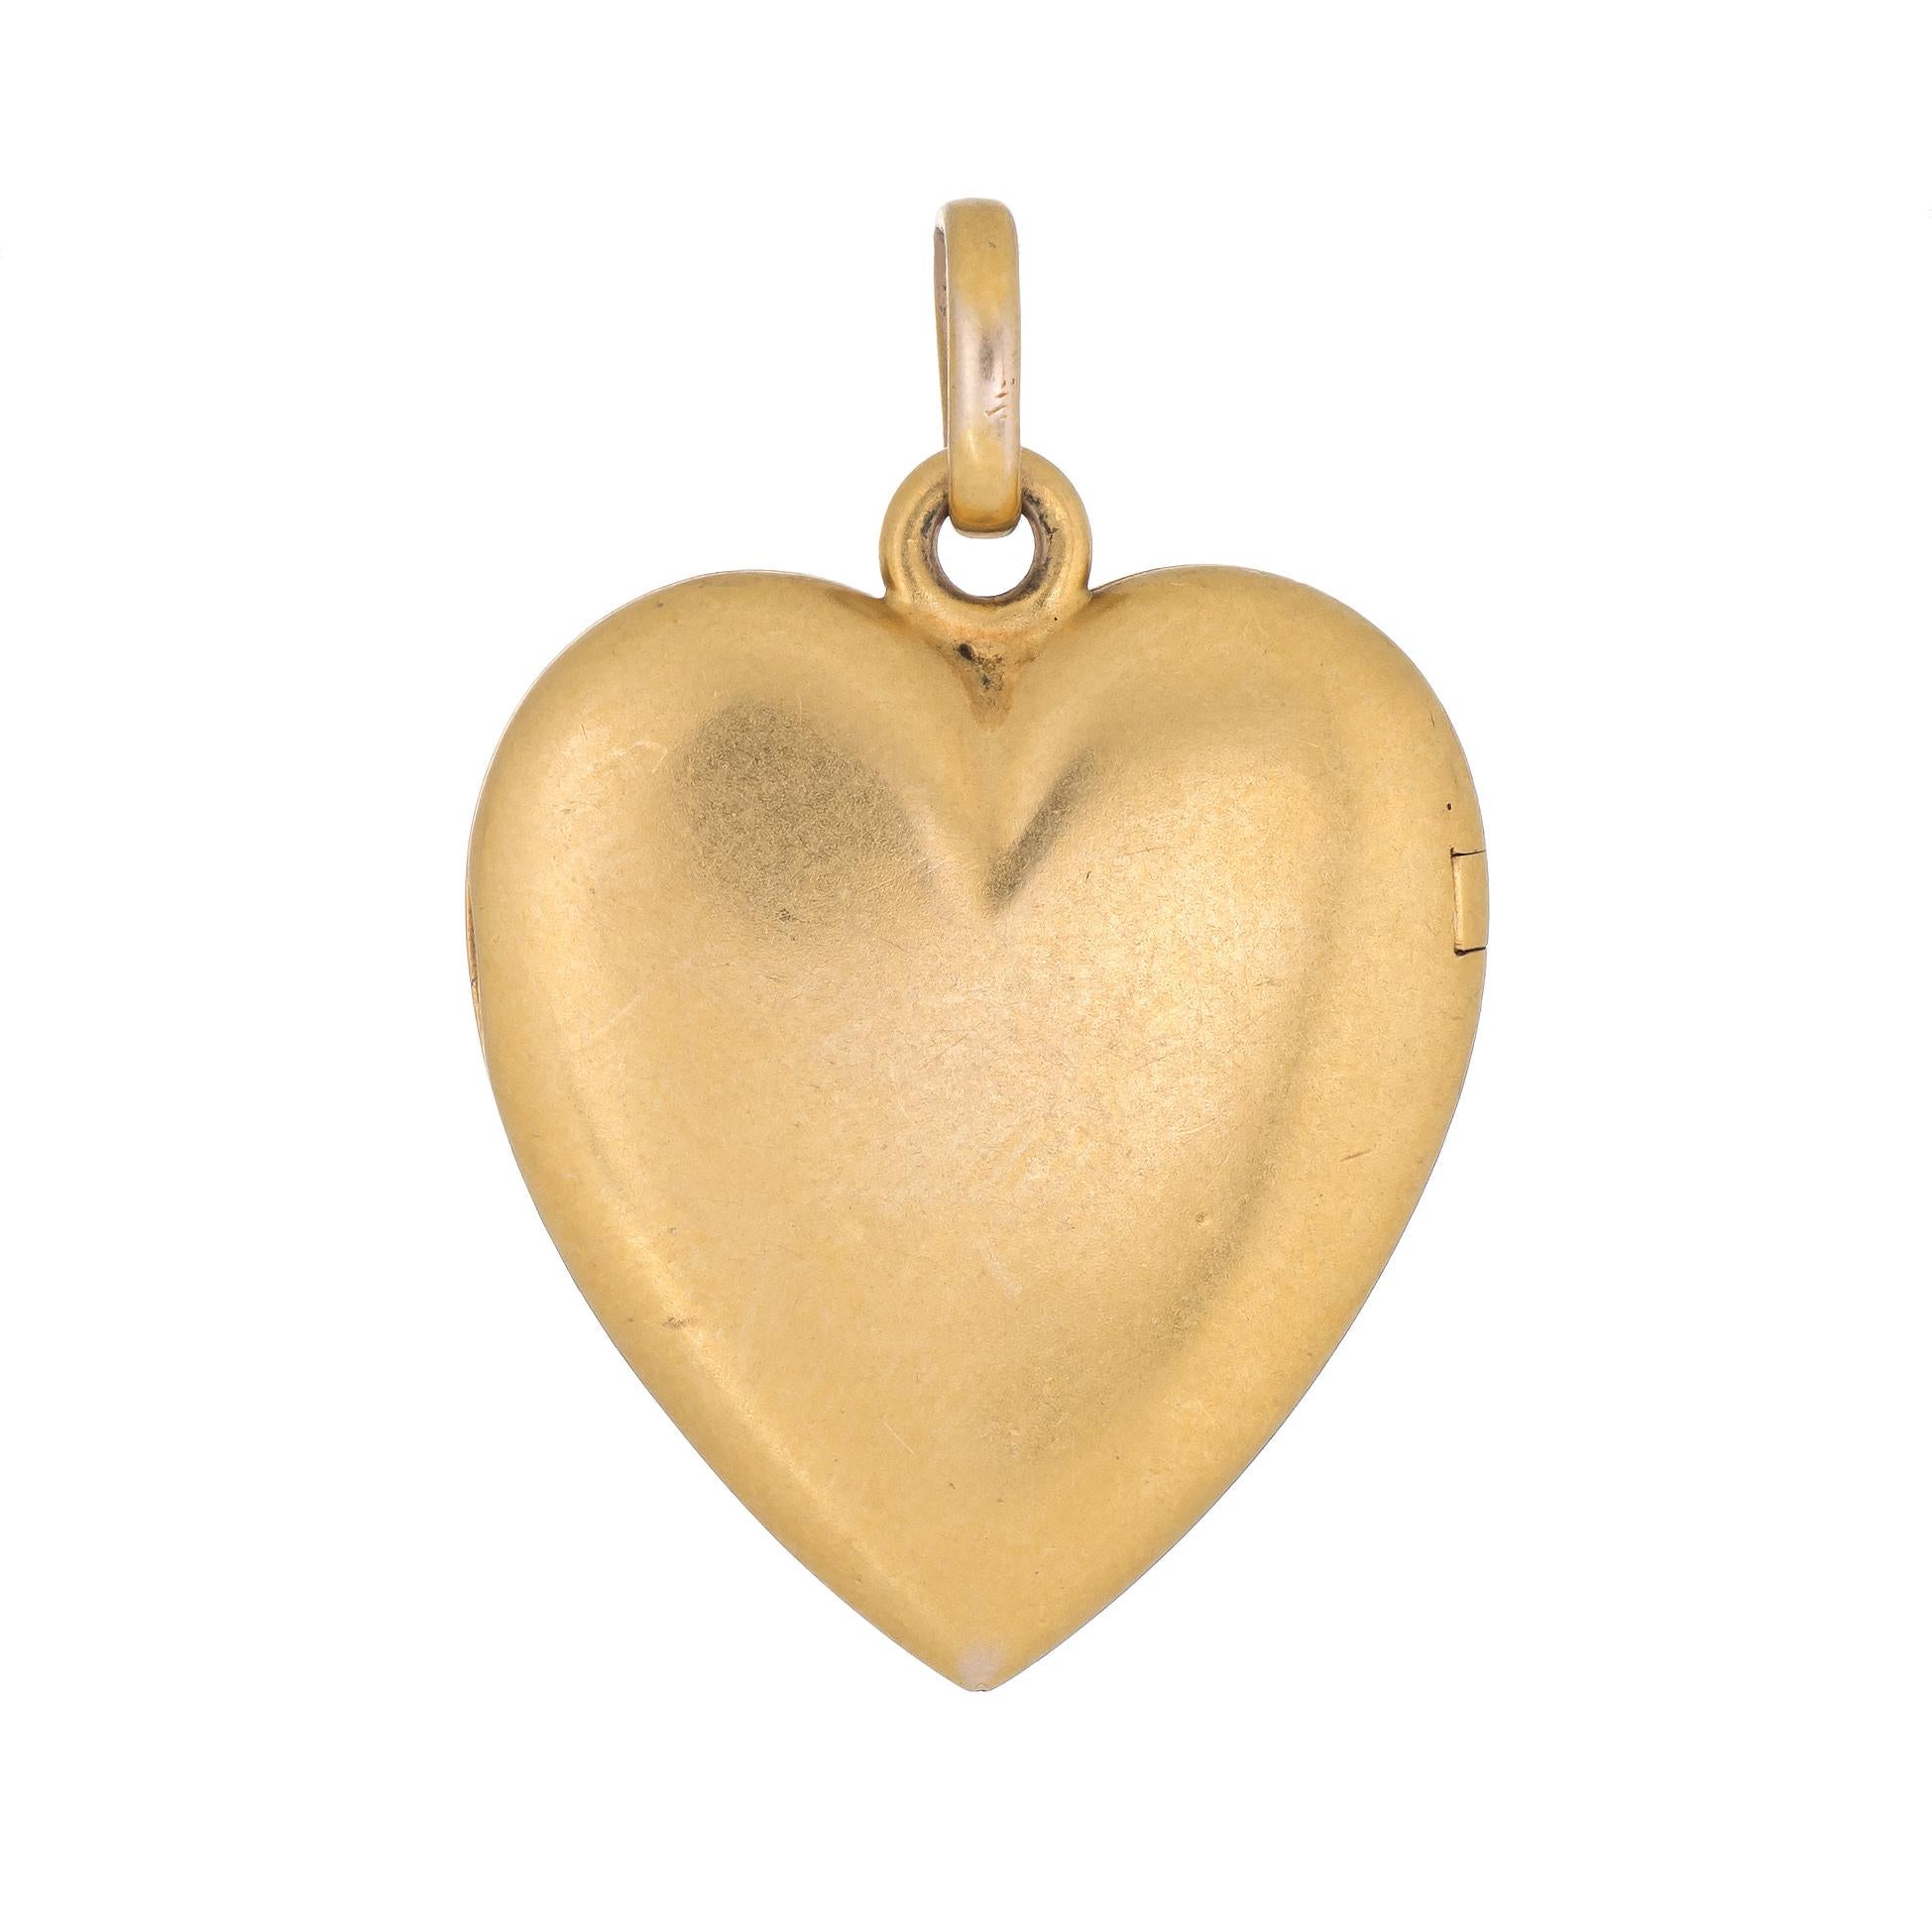 Elegant and finely detailed antique Victorian heart locket (circa 1880s to 1900s), crafted in 14k yellow gold. 

The romantic heart was a popular motif during the Victorian era. The locket is engraved with the initials 